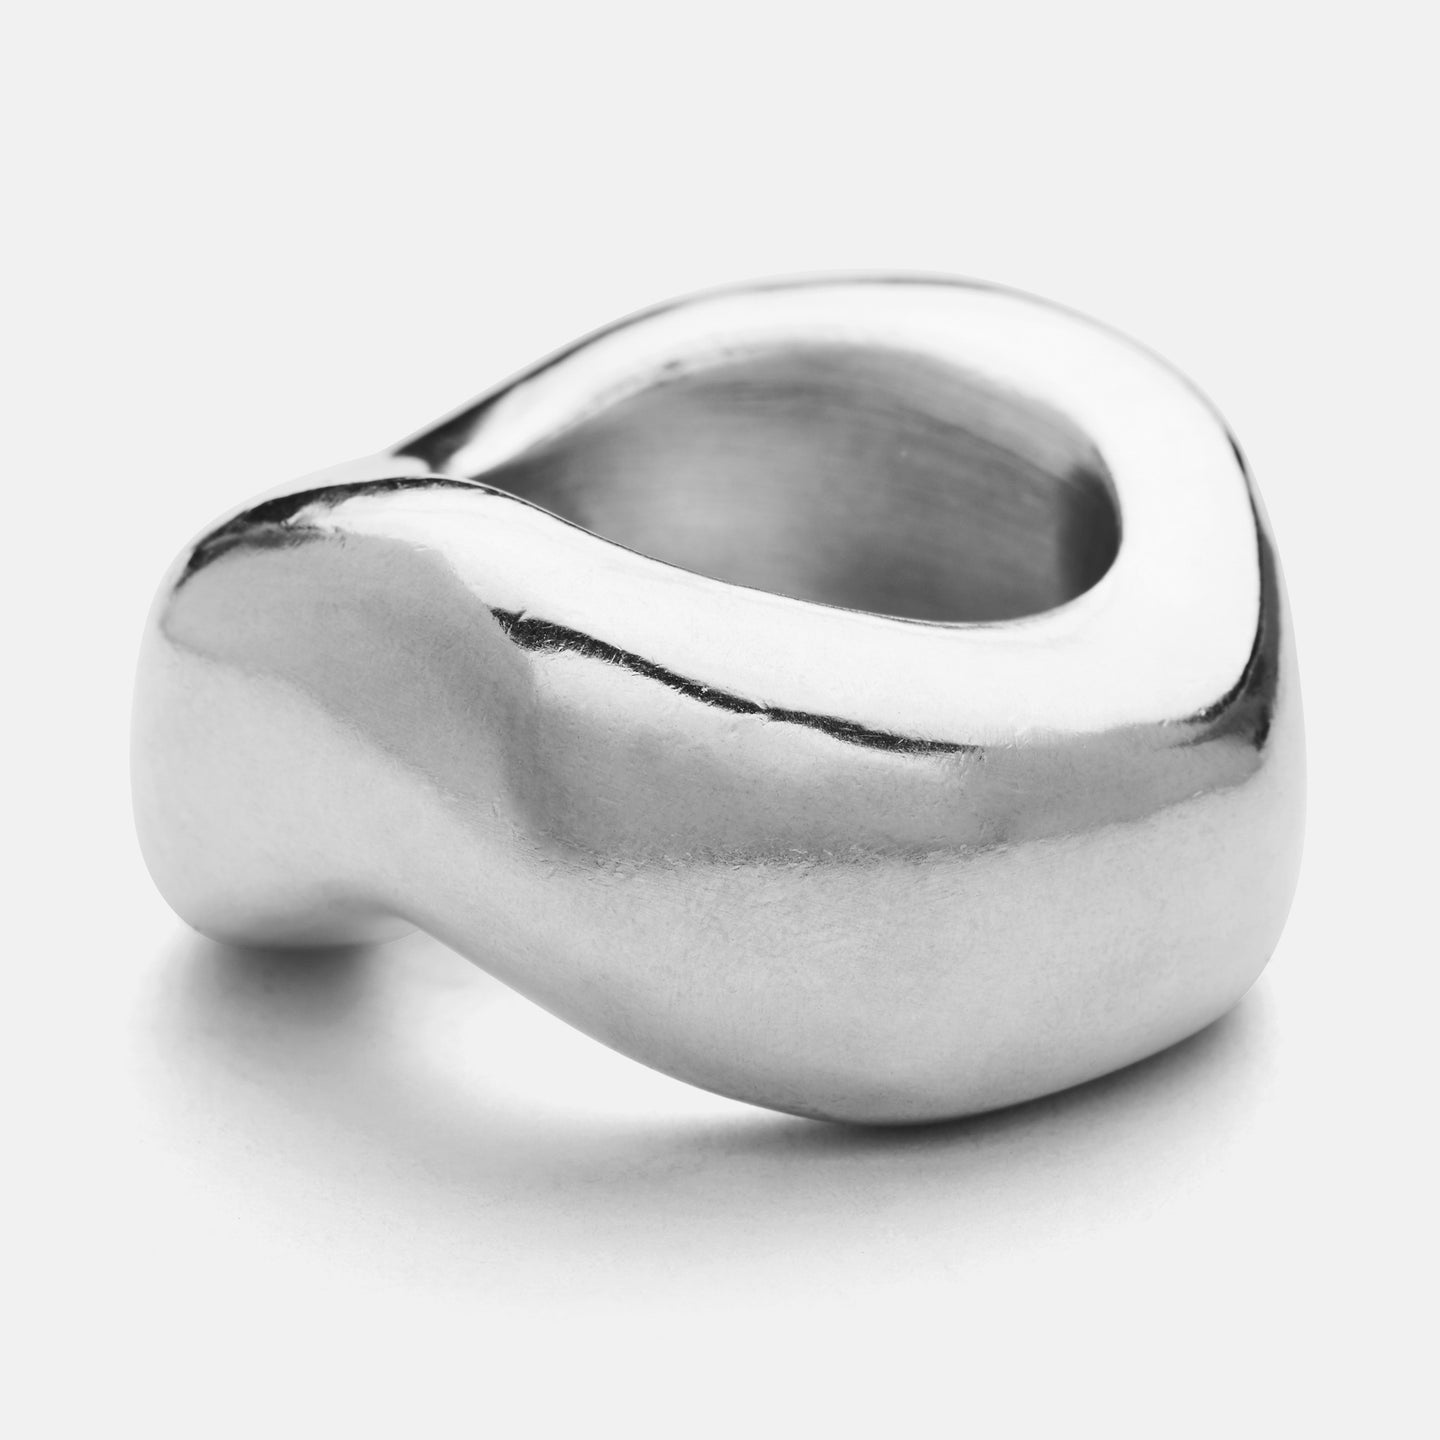 Wave Napkin Rings, Silver- set of 4